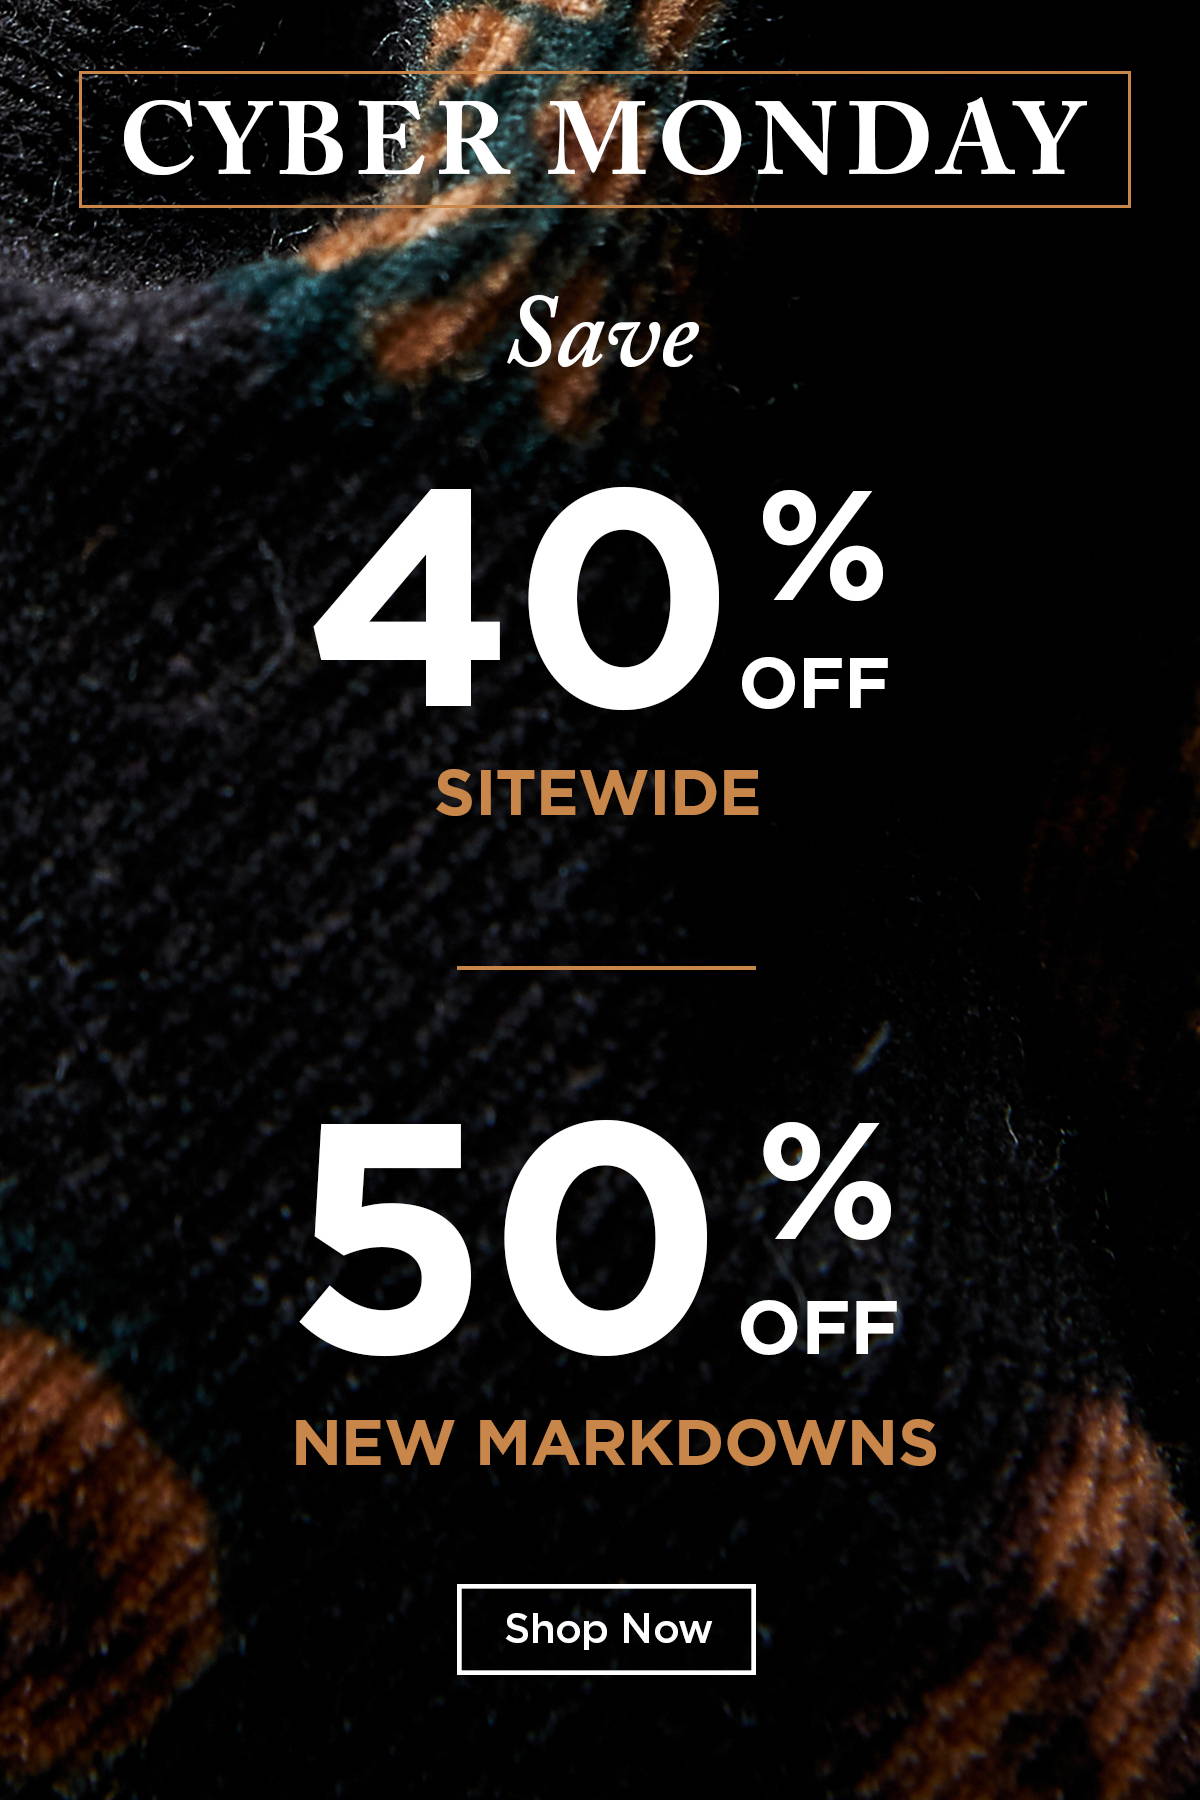 BLACK FRIDAY SALE! 40% OFF FULL-PRICE ITEMS SITEWIDE | PLUS EXTRA 50% OFF SALE. SHOP NOW